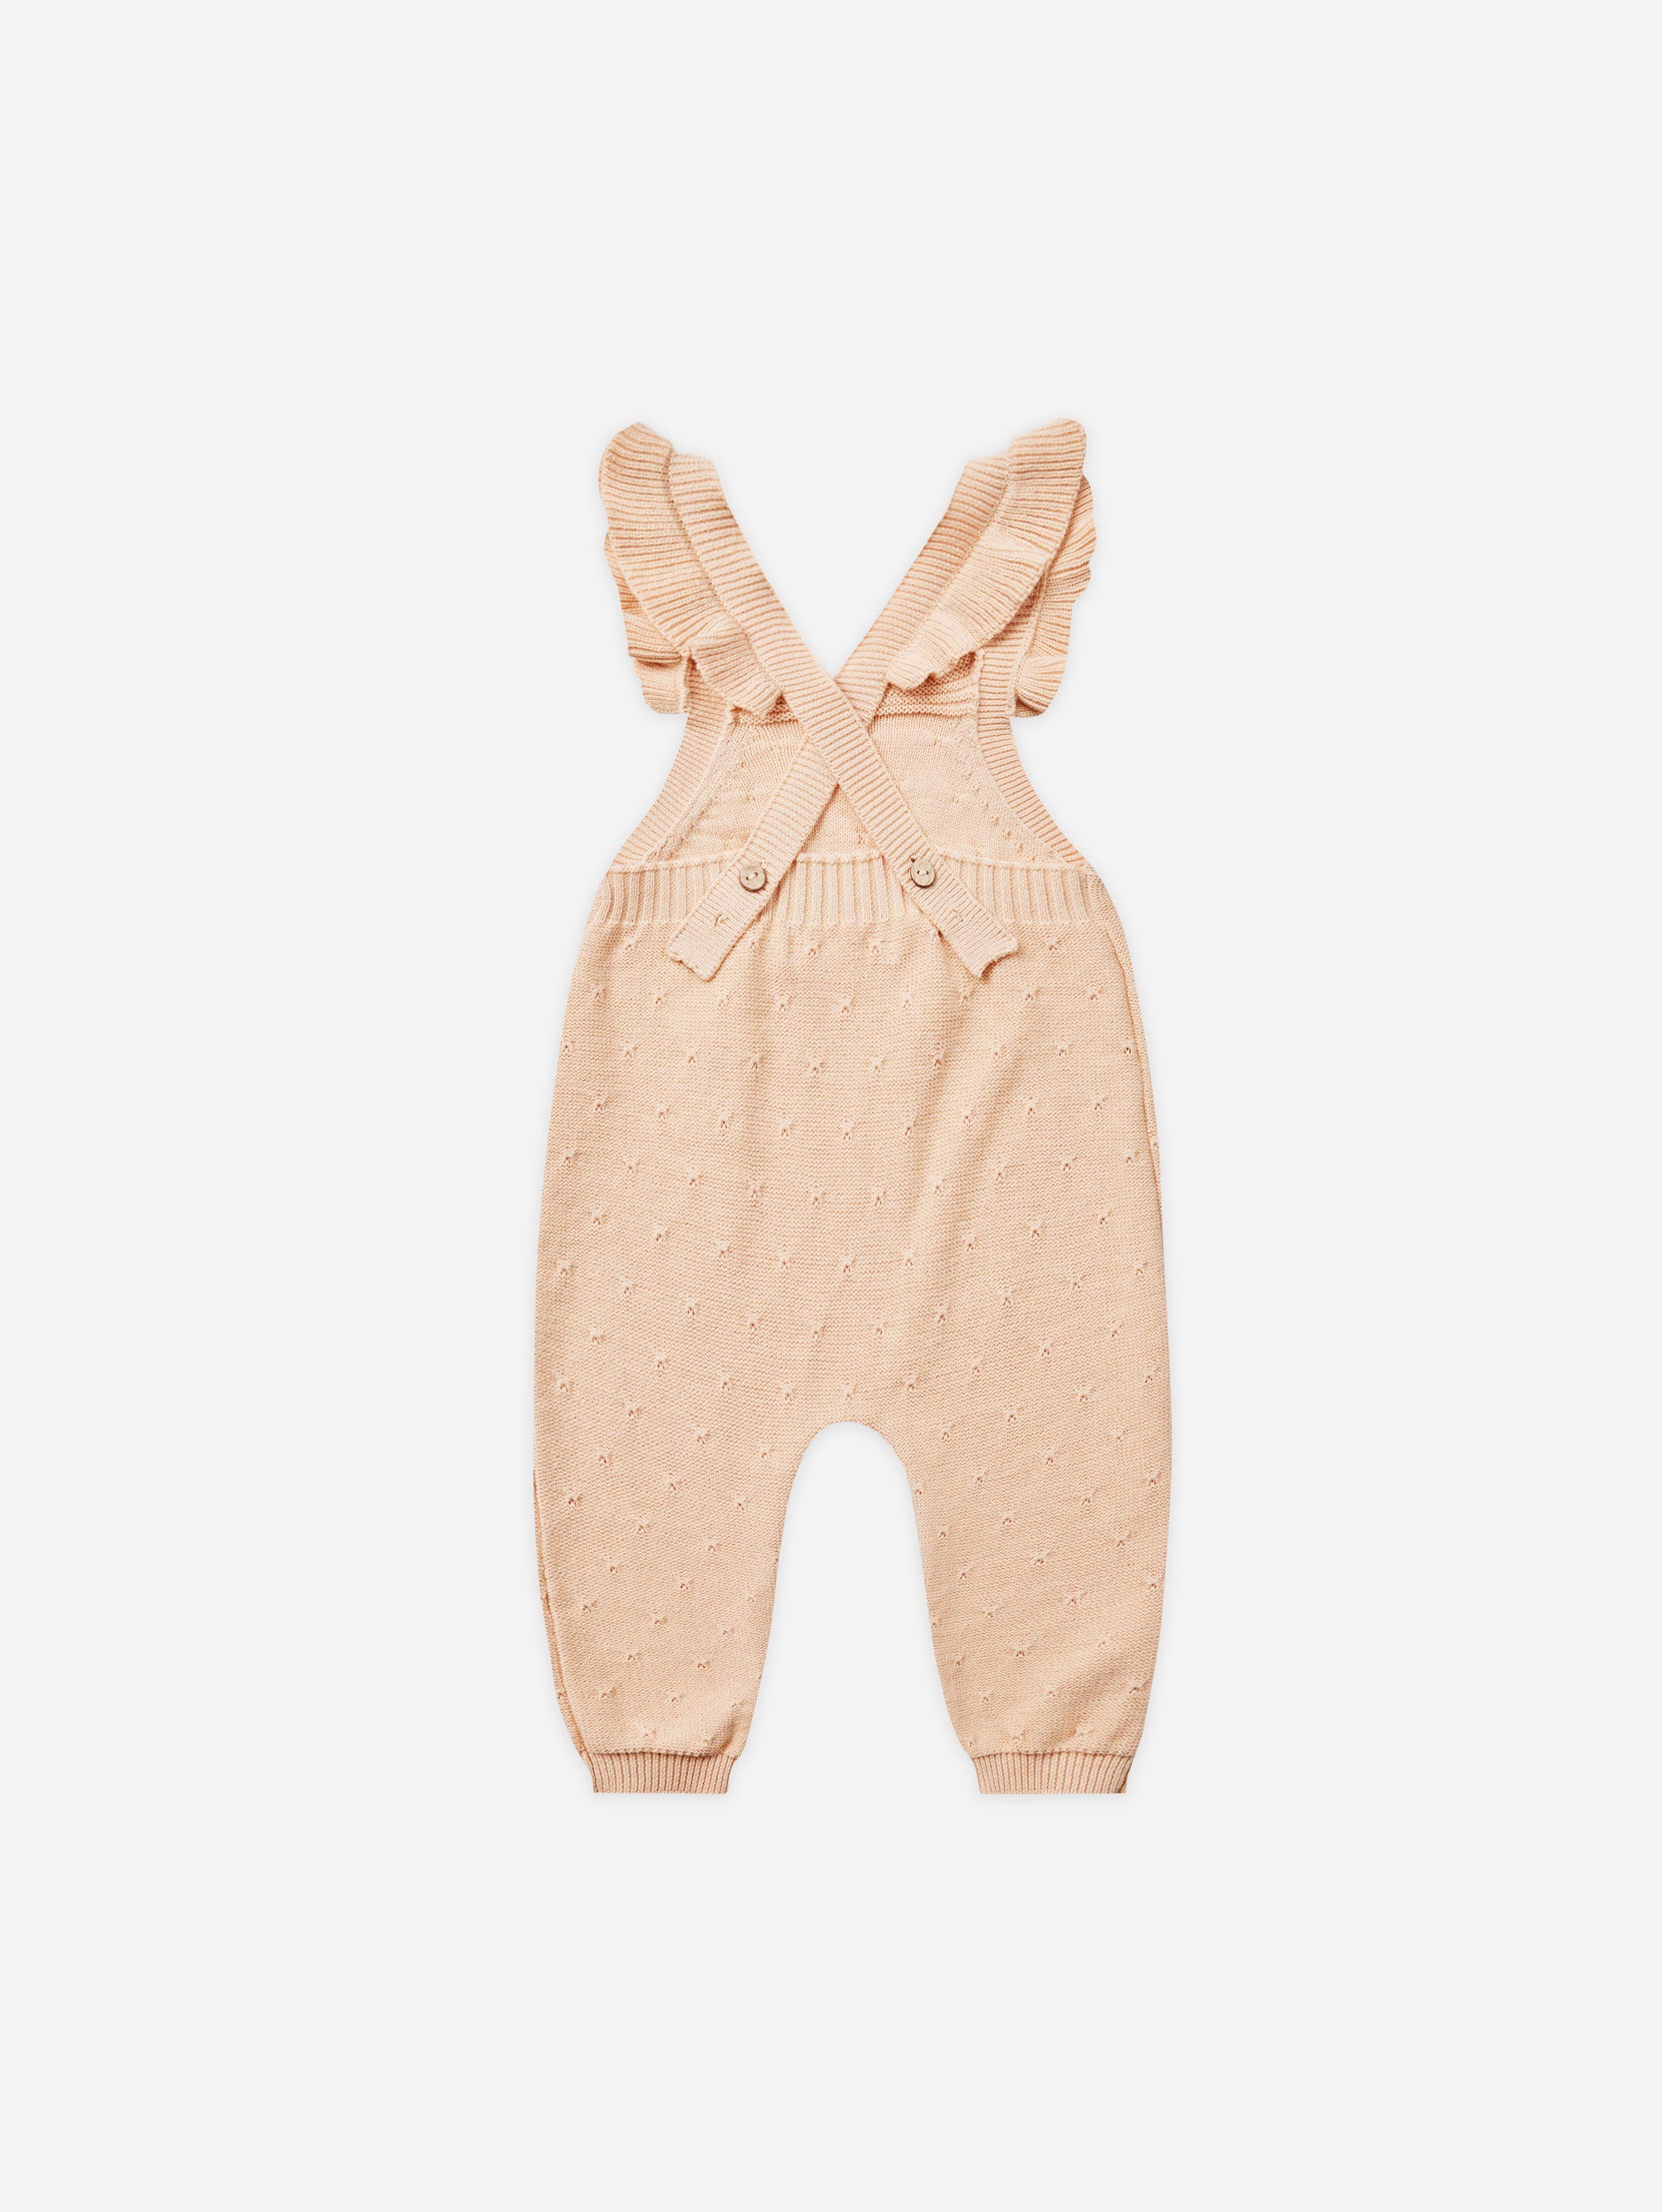 Pointelle Knit Overalls || Shell - Rylee + Cru | Kids Clothes | Trendy Baby Clothes | Modern Infant Outfits |